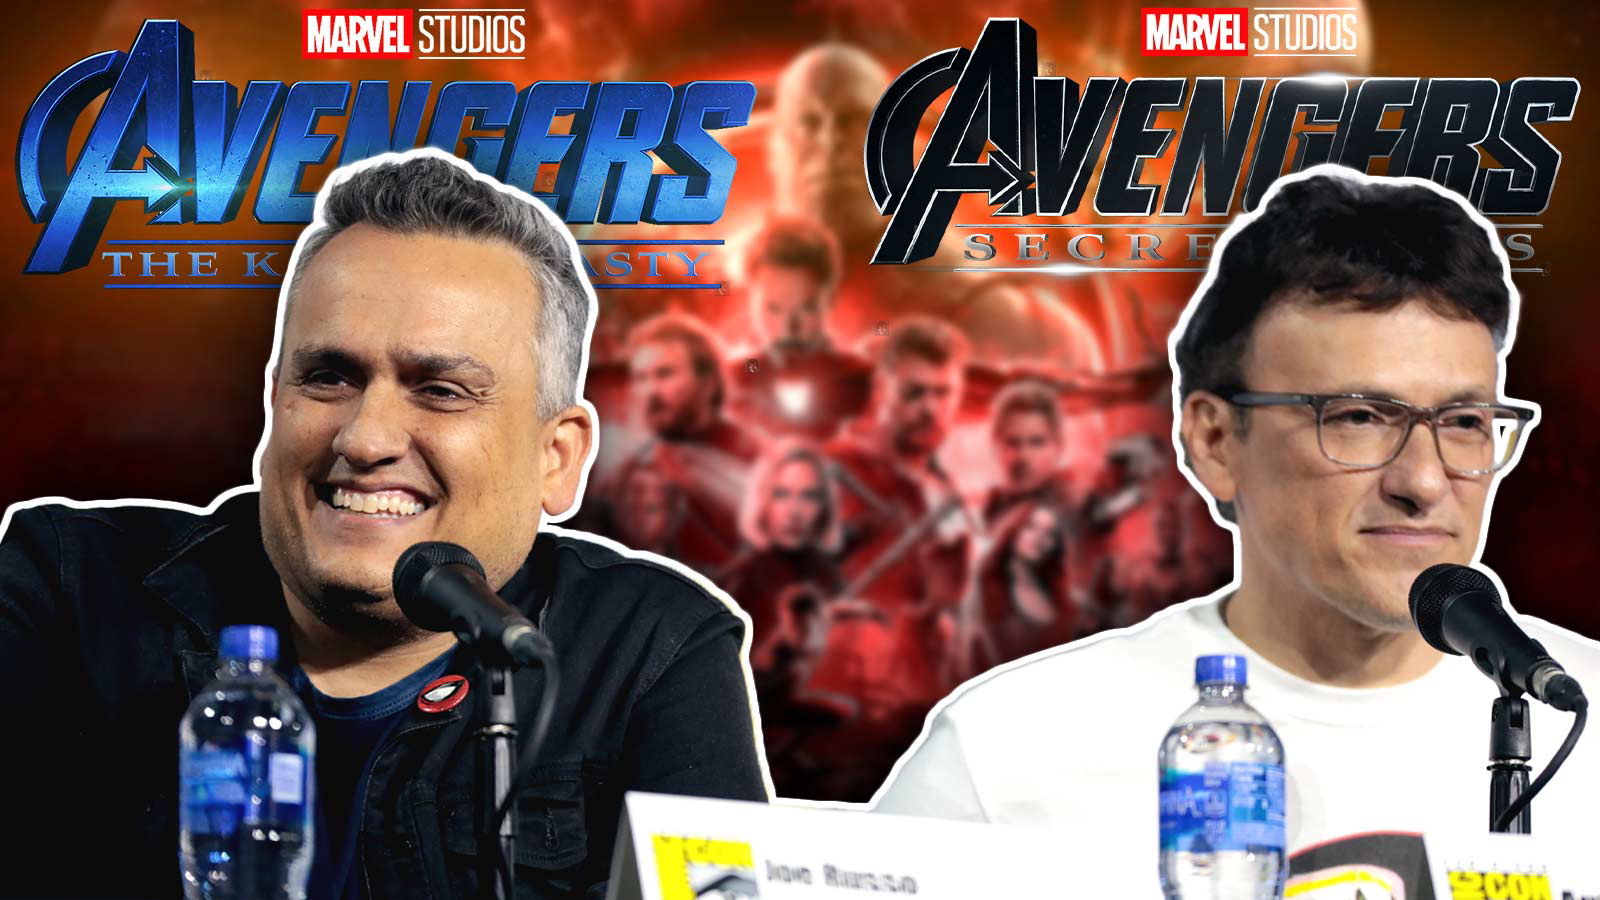 Russo Brothers’ Last 3 Movies After Leaving the MCU Are Enough Reasons For Kevin Feige to Bring Them Back For Avengers 5 and Secret Wars